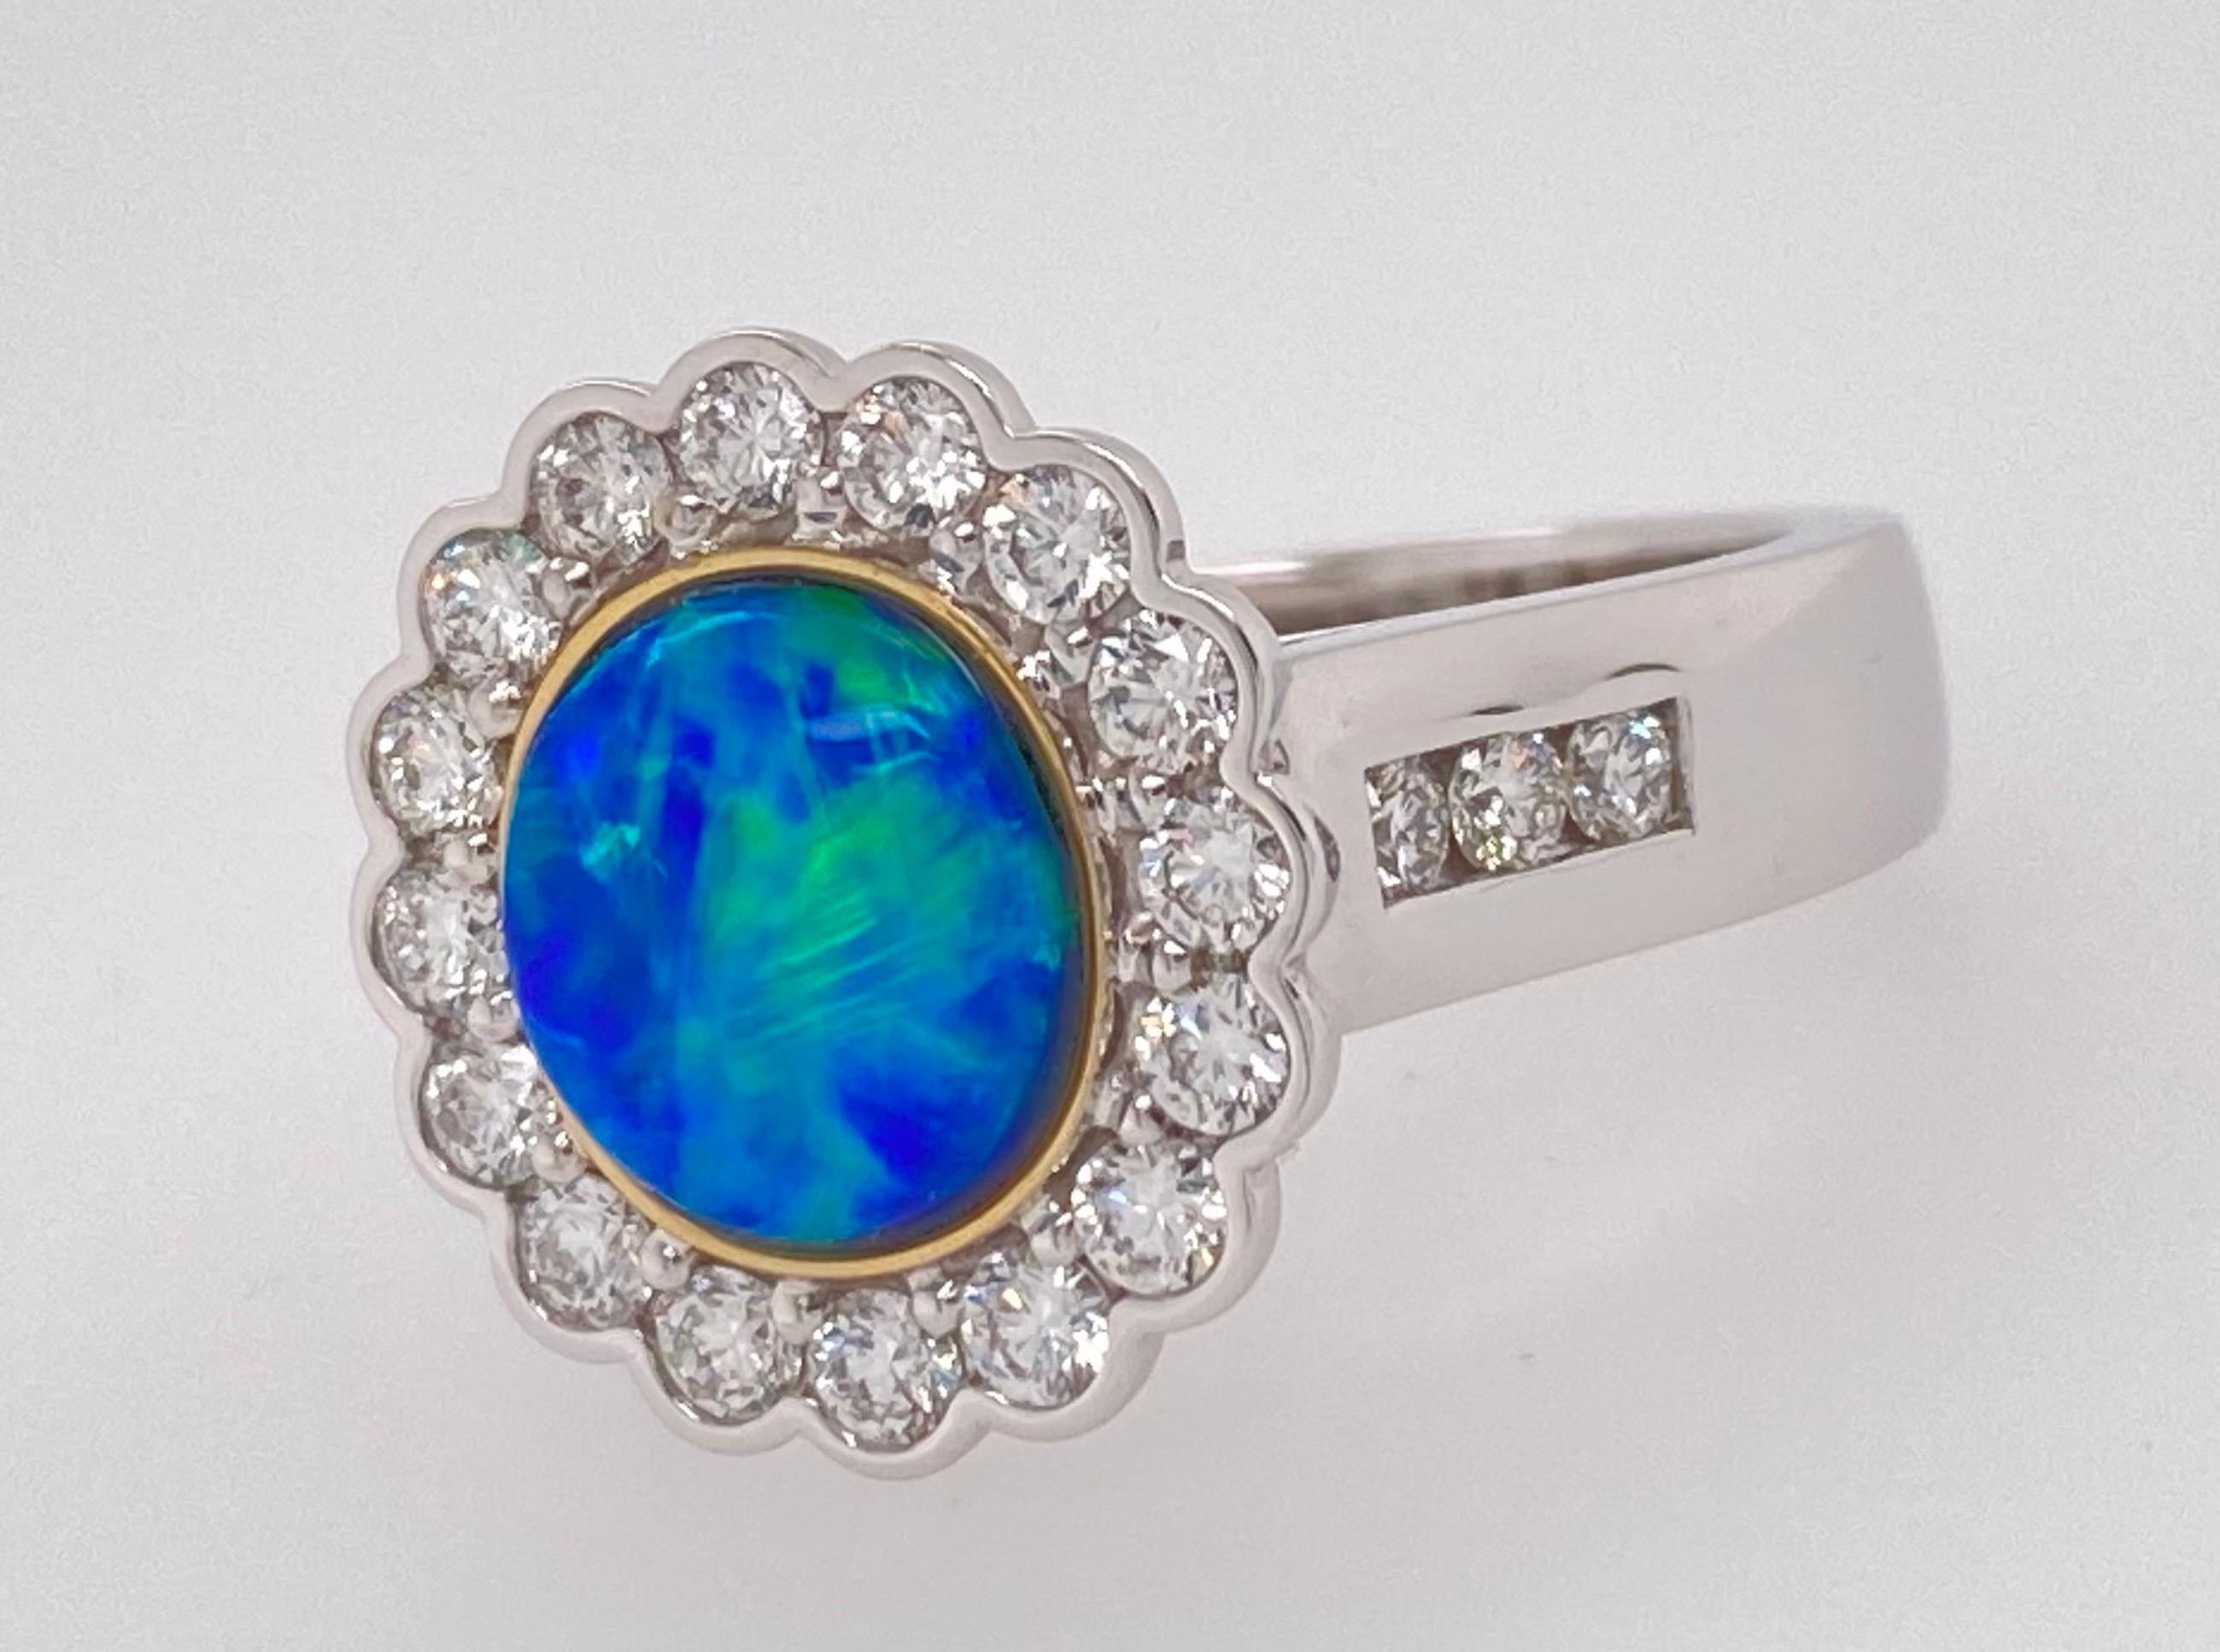 The center stone is a solid lightning ridge crystal opal set in a bezel setting. There is sixteen round brilliant cut diamonds surrounding the center stone forming a cluster head. Each shoulder contains three round brilliant cut diamonds in channel